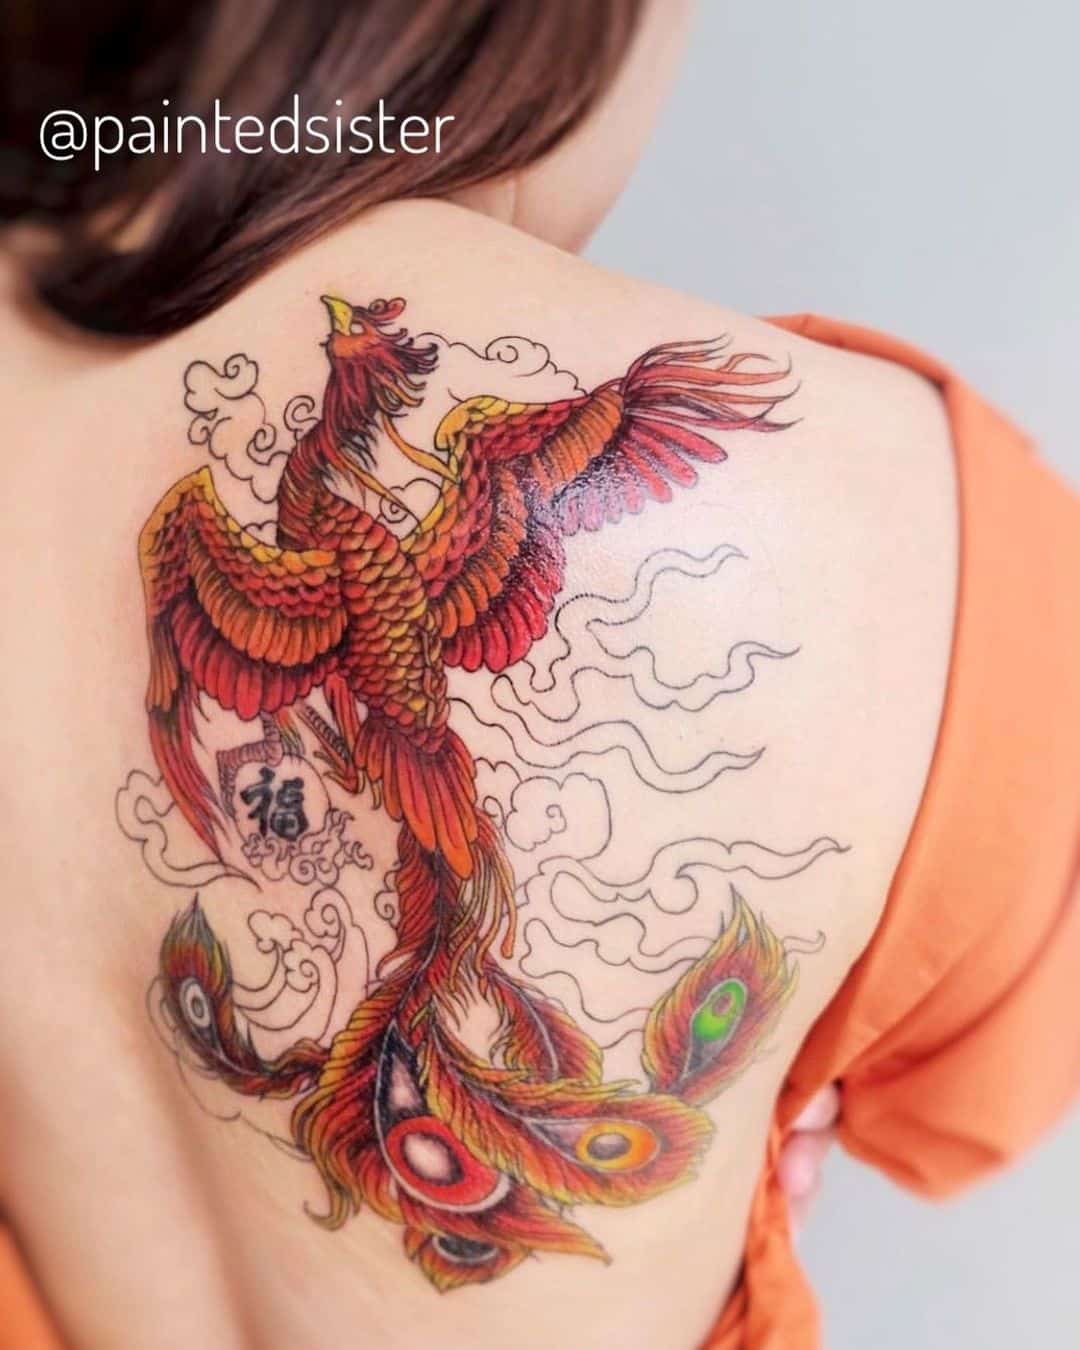 🔥🔥 Japanese tattoos [The Complete Guide] +100 Tattoos 🔥🔥